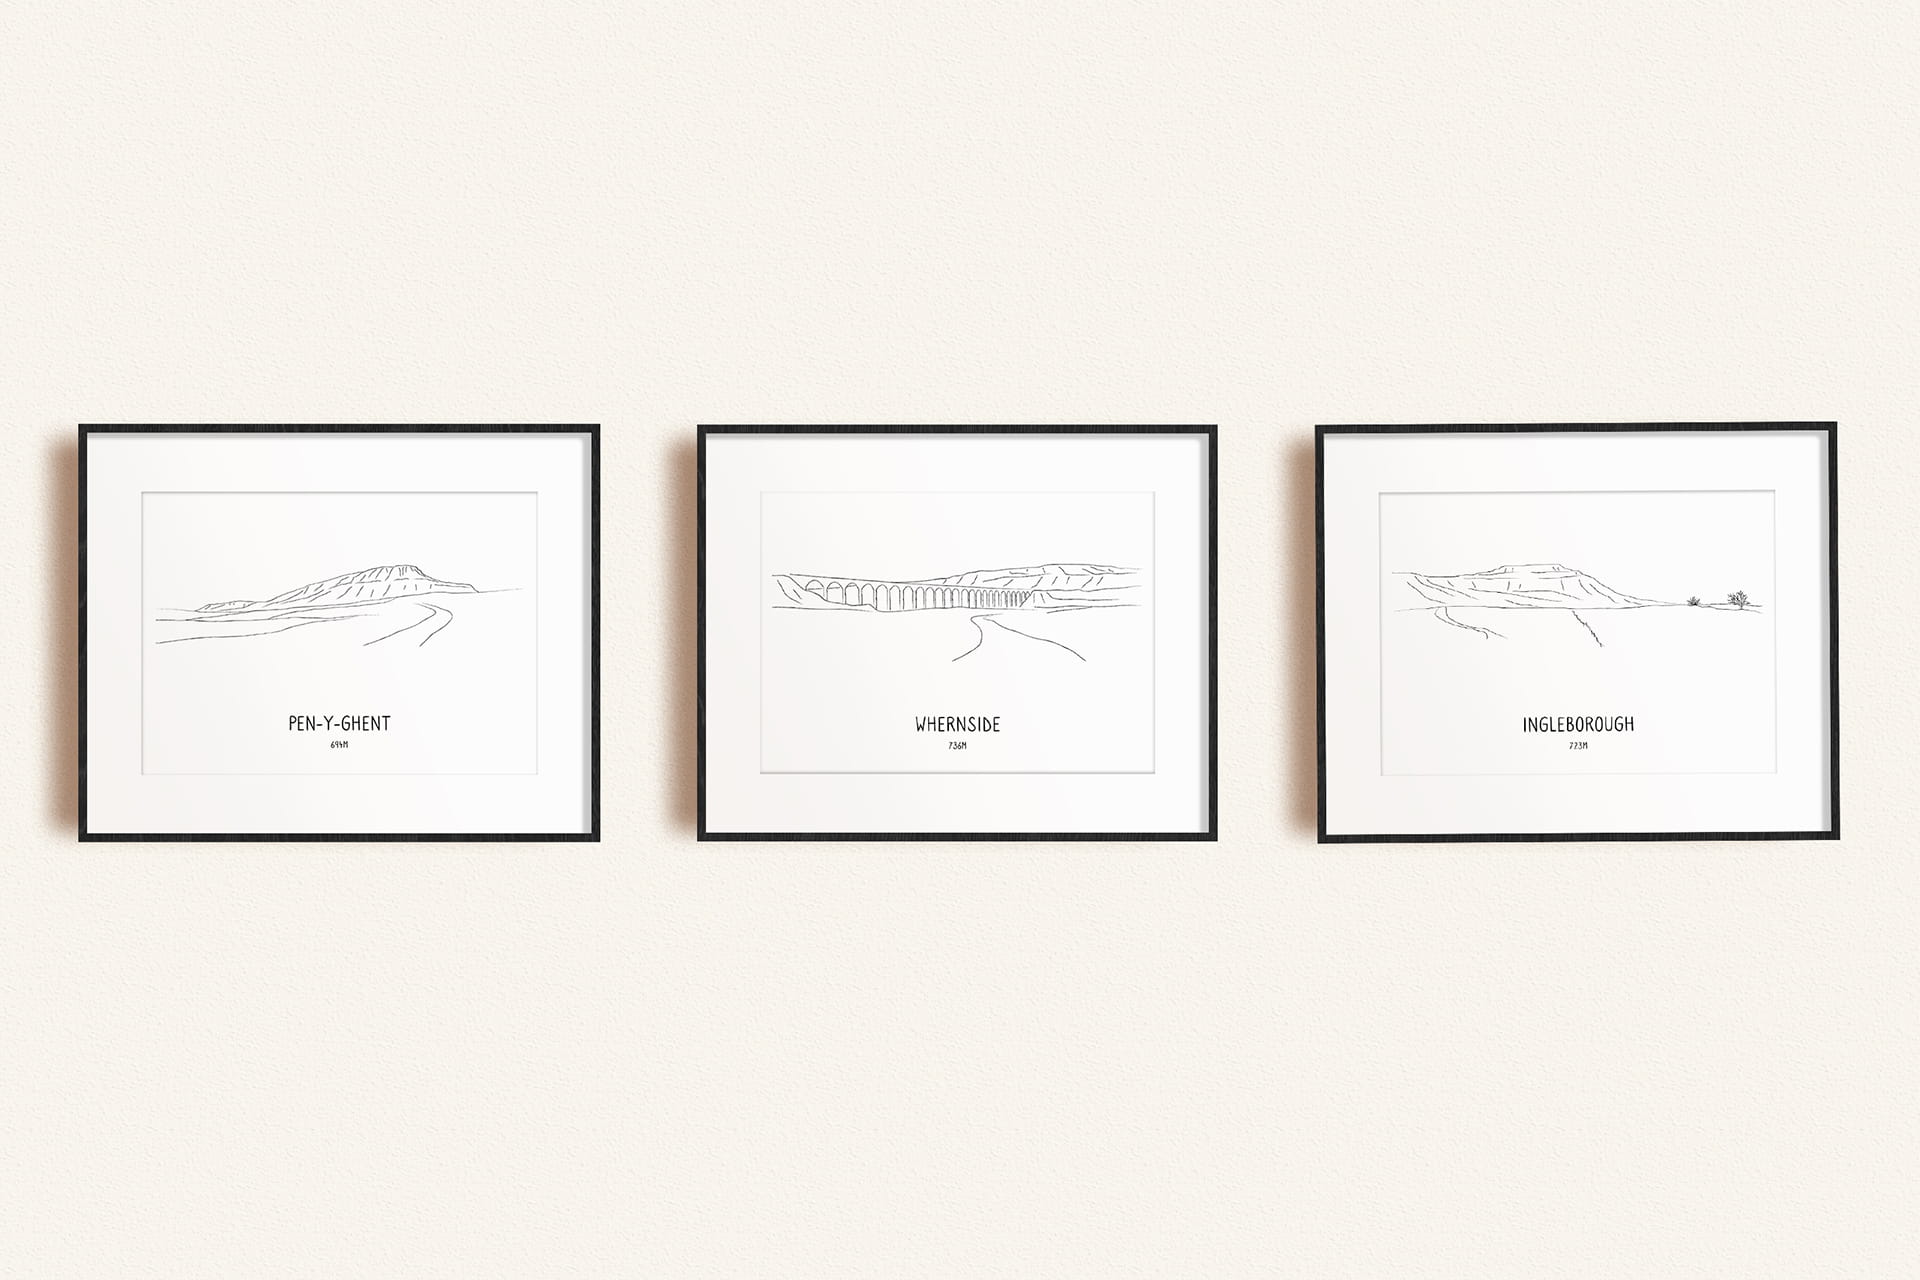 Yorkshire Three Peaks Challenge set of three line art prints in picture frames